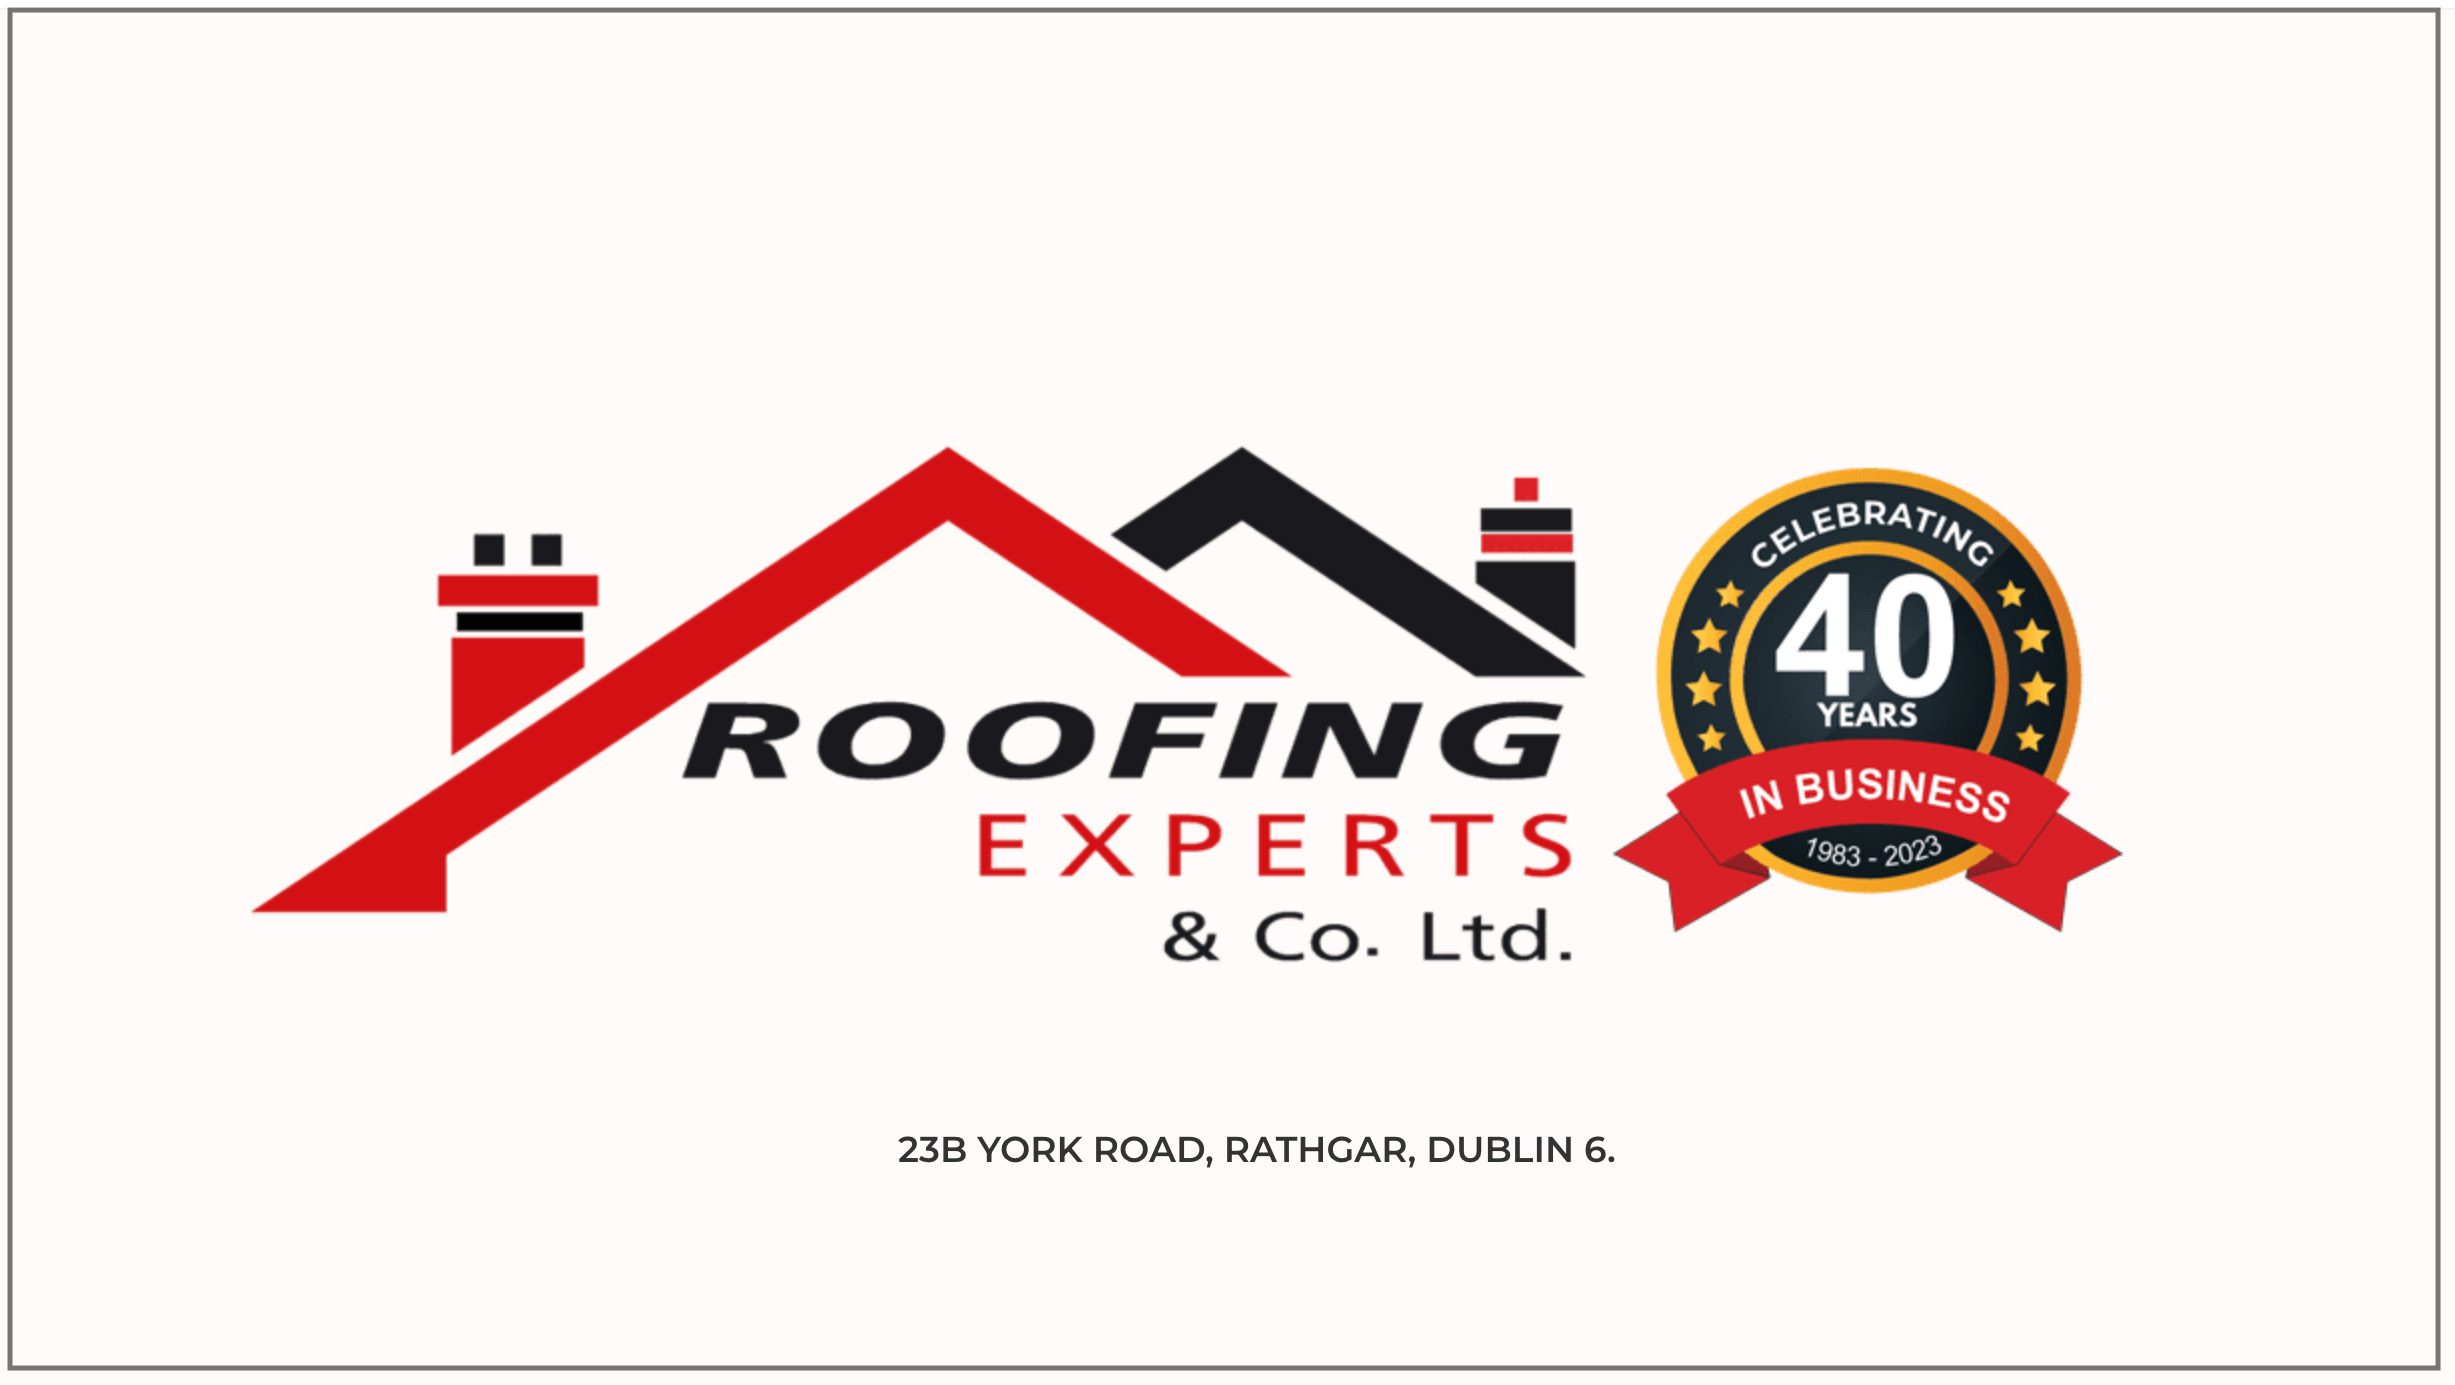 Roofing Experts Celebrates 40 Years In Business